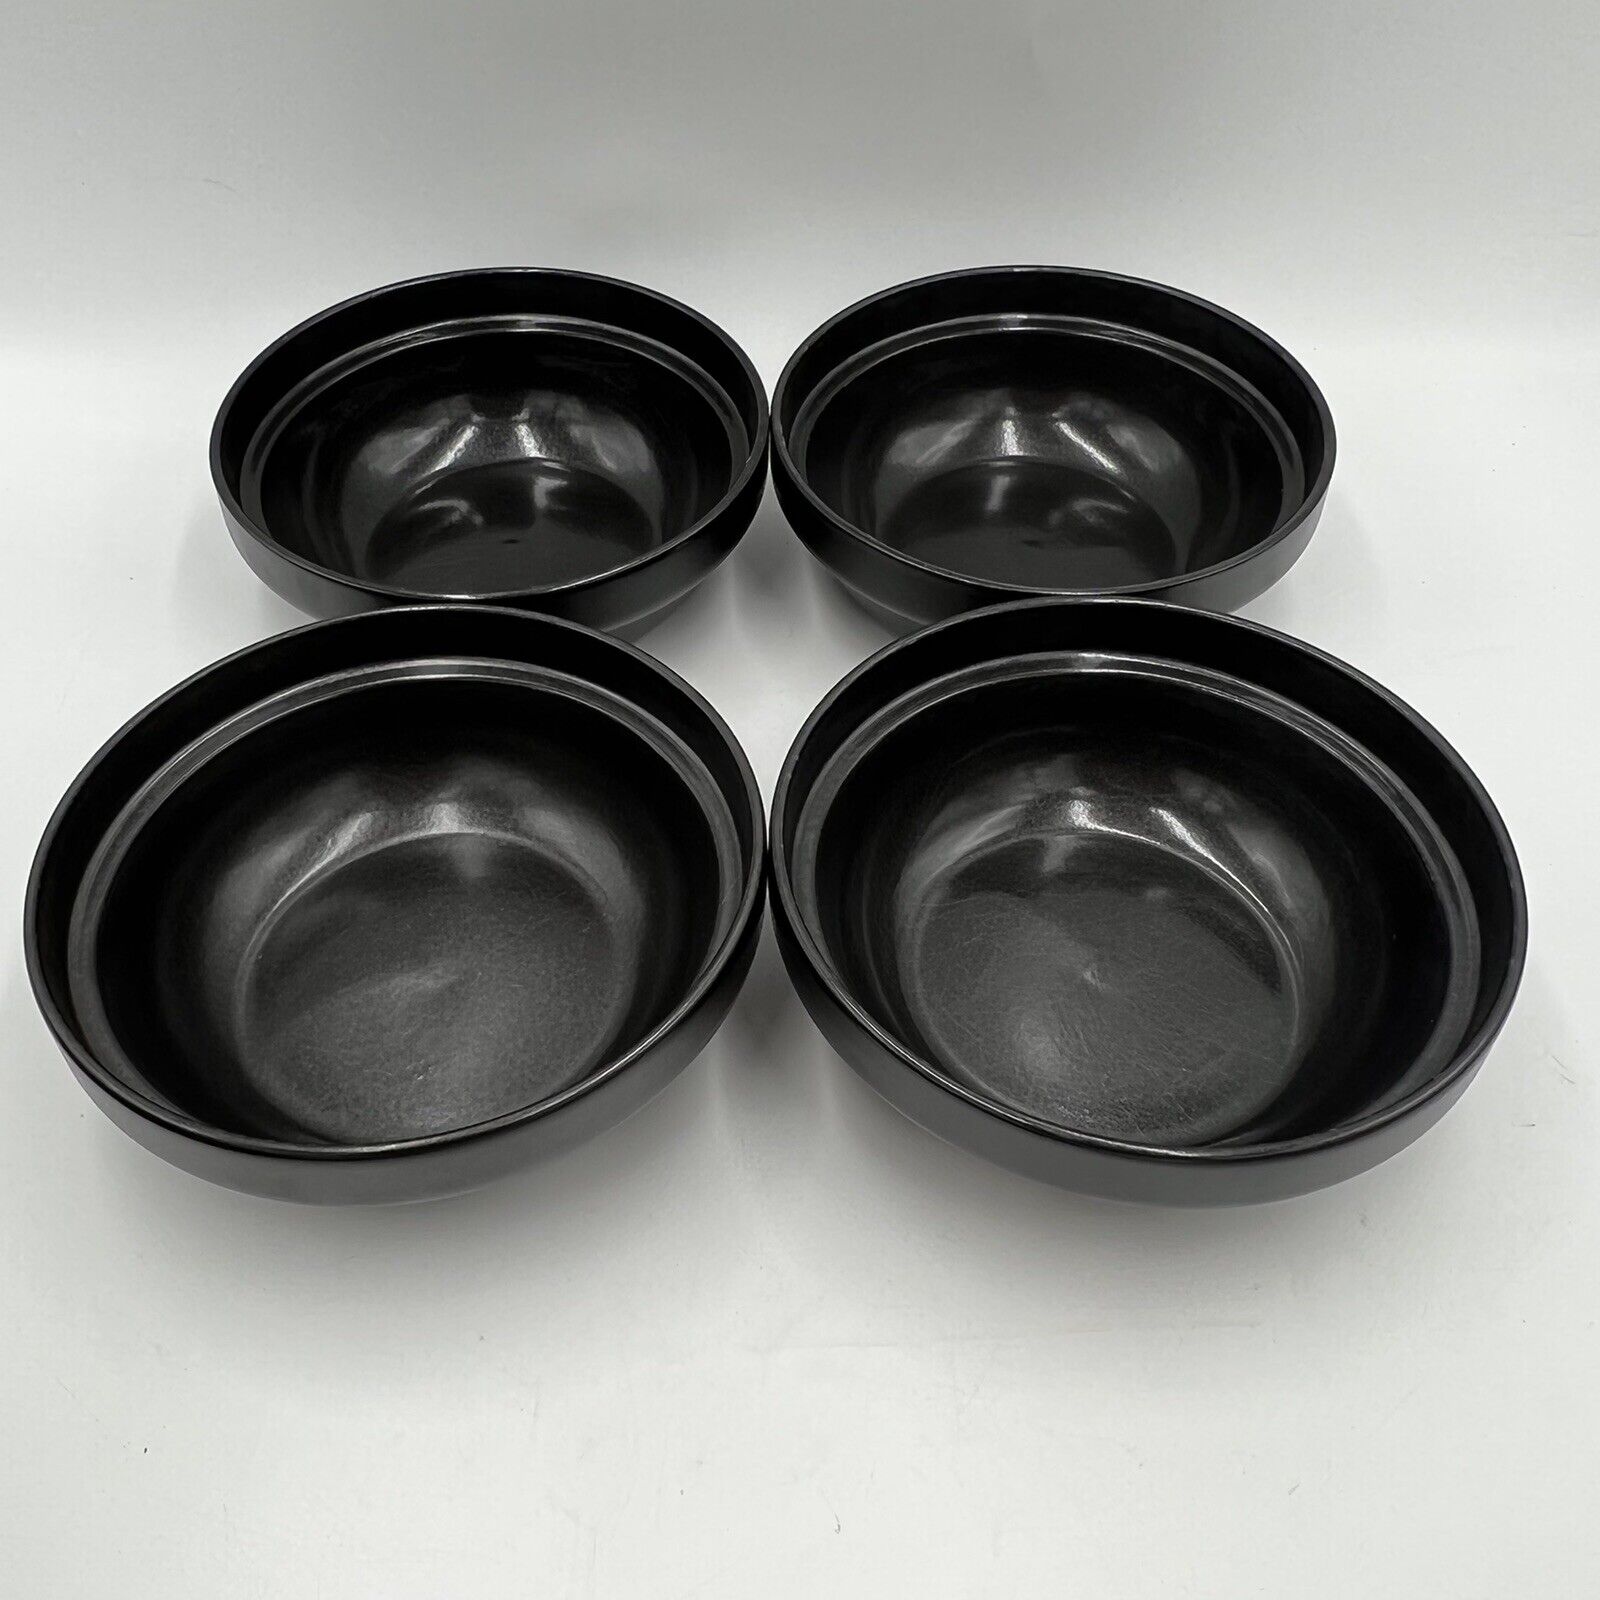 Read more about the article Rare Arabia Finland Kokki Ceramic Stoneware Cereal Bowl Midcentury Set (4) Black